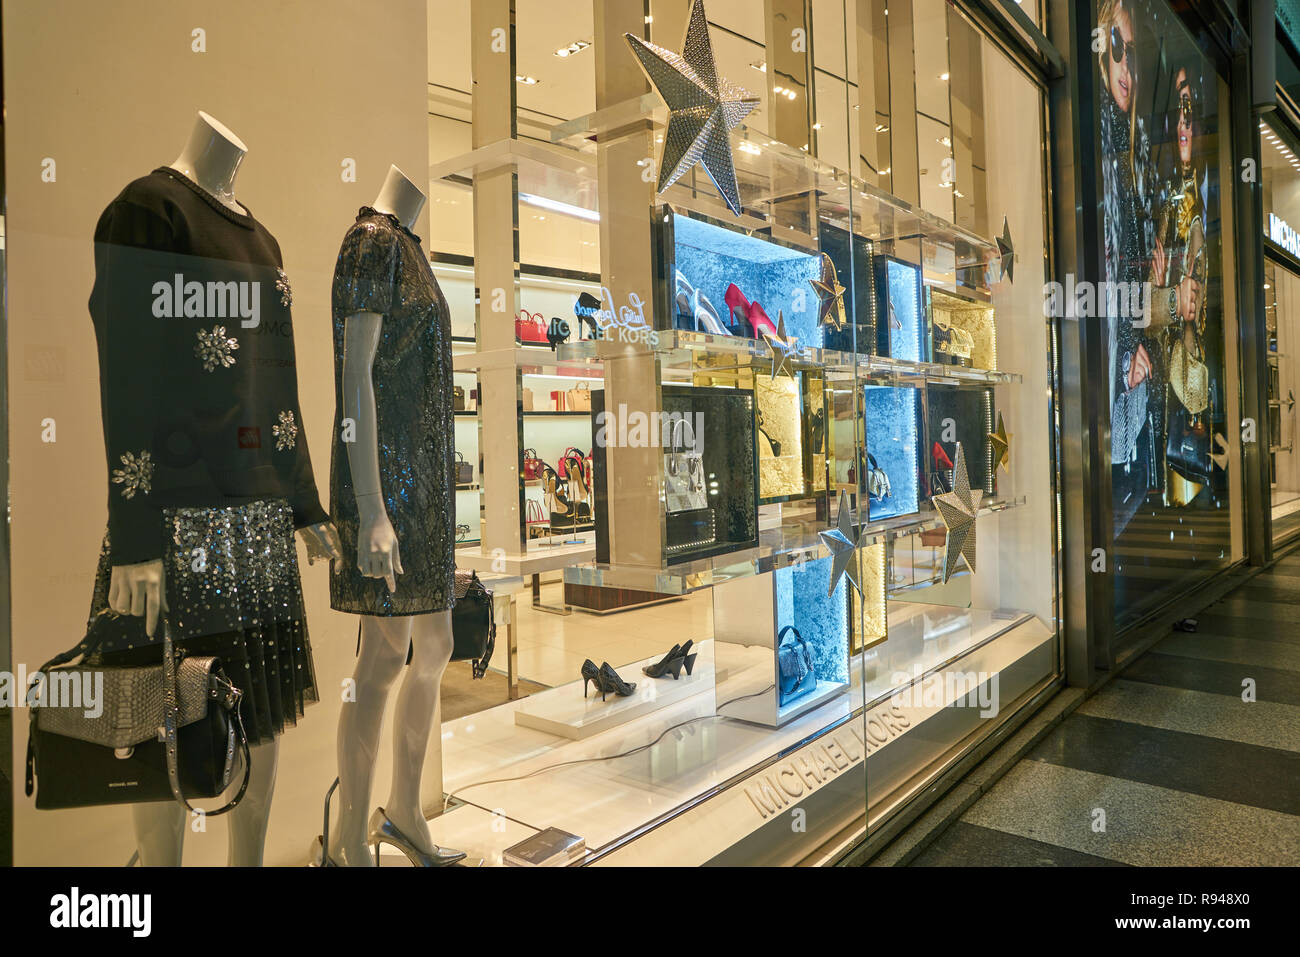 Michael Kors Store High Resolution Stock Photography and Images - Alamy